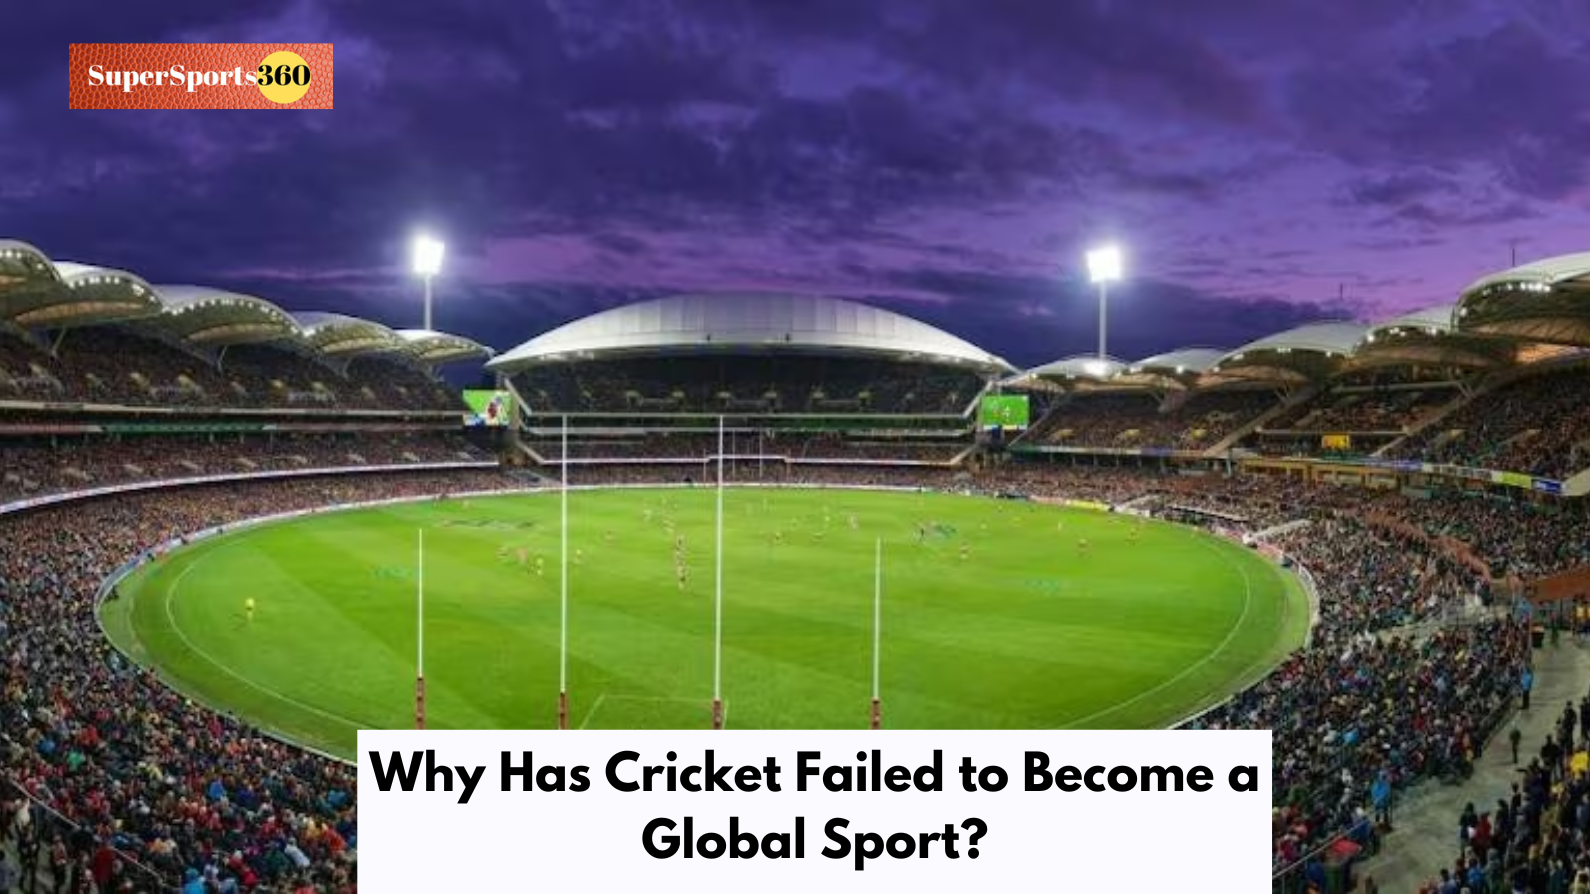 Why Has Cricket Failed to Become a Global Sport?